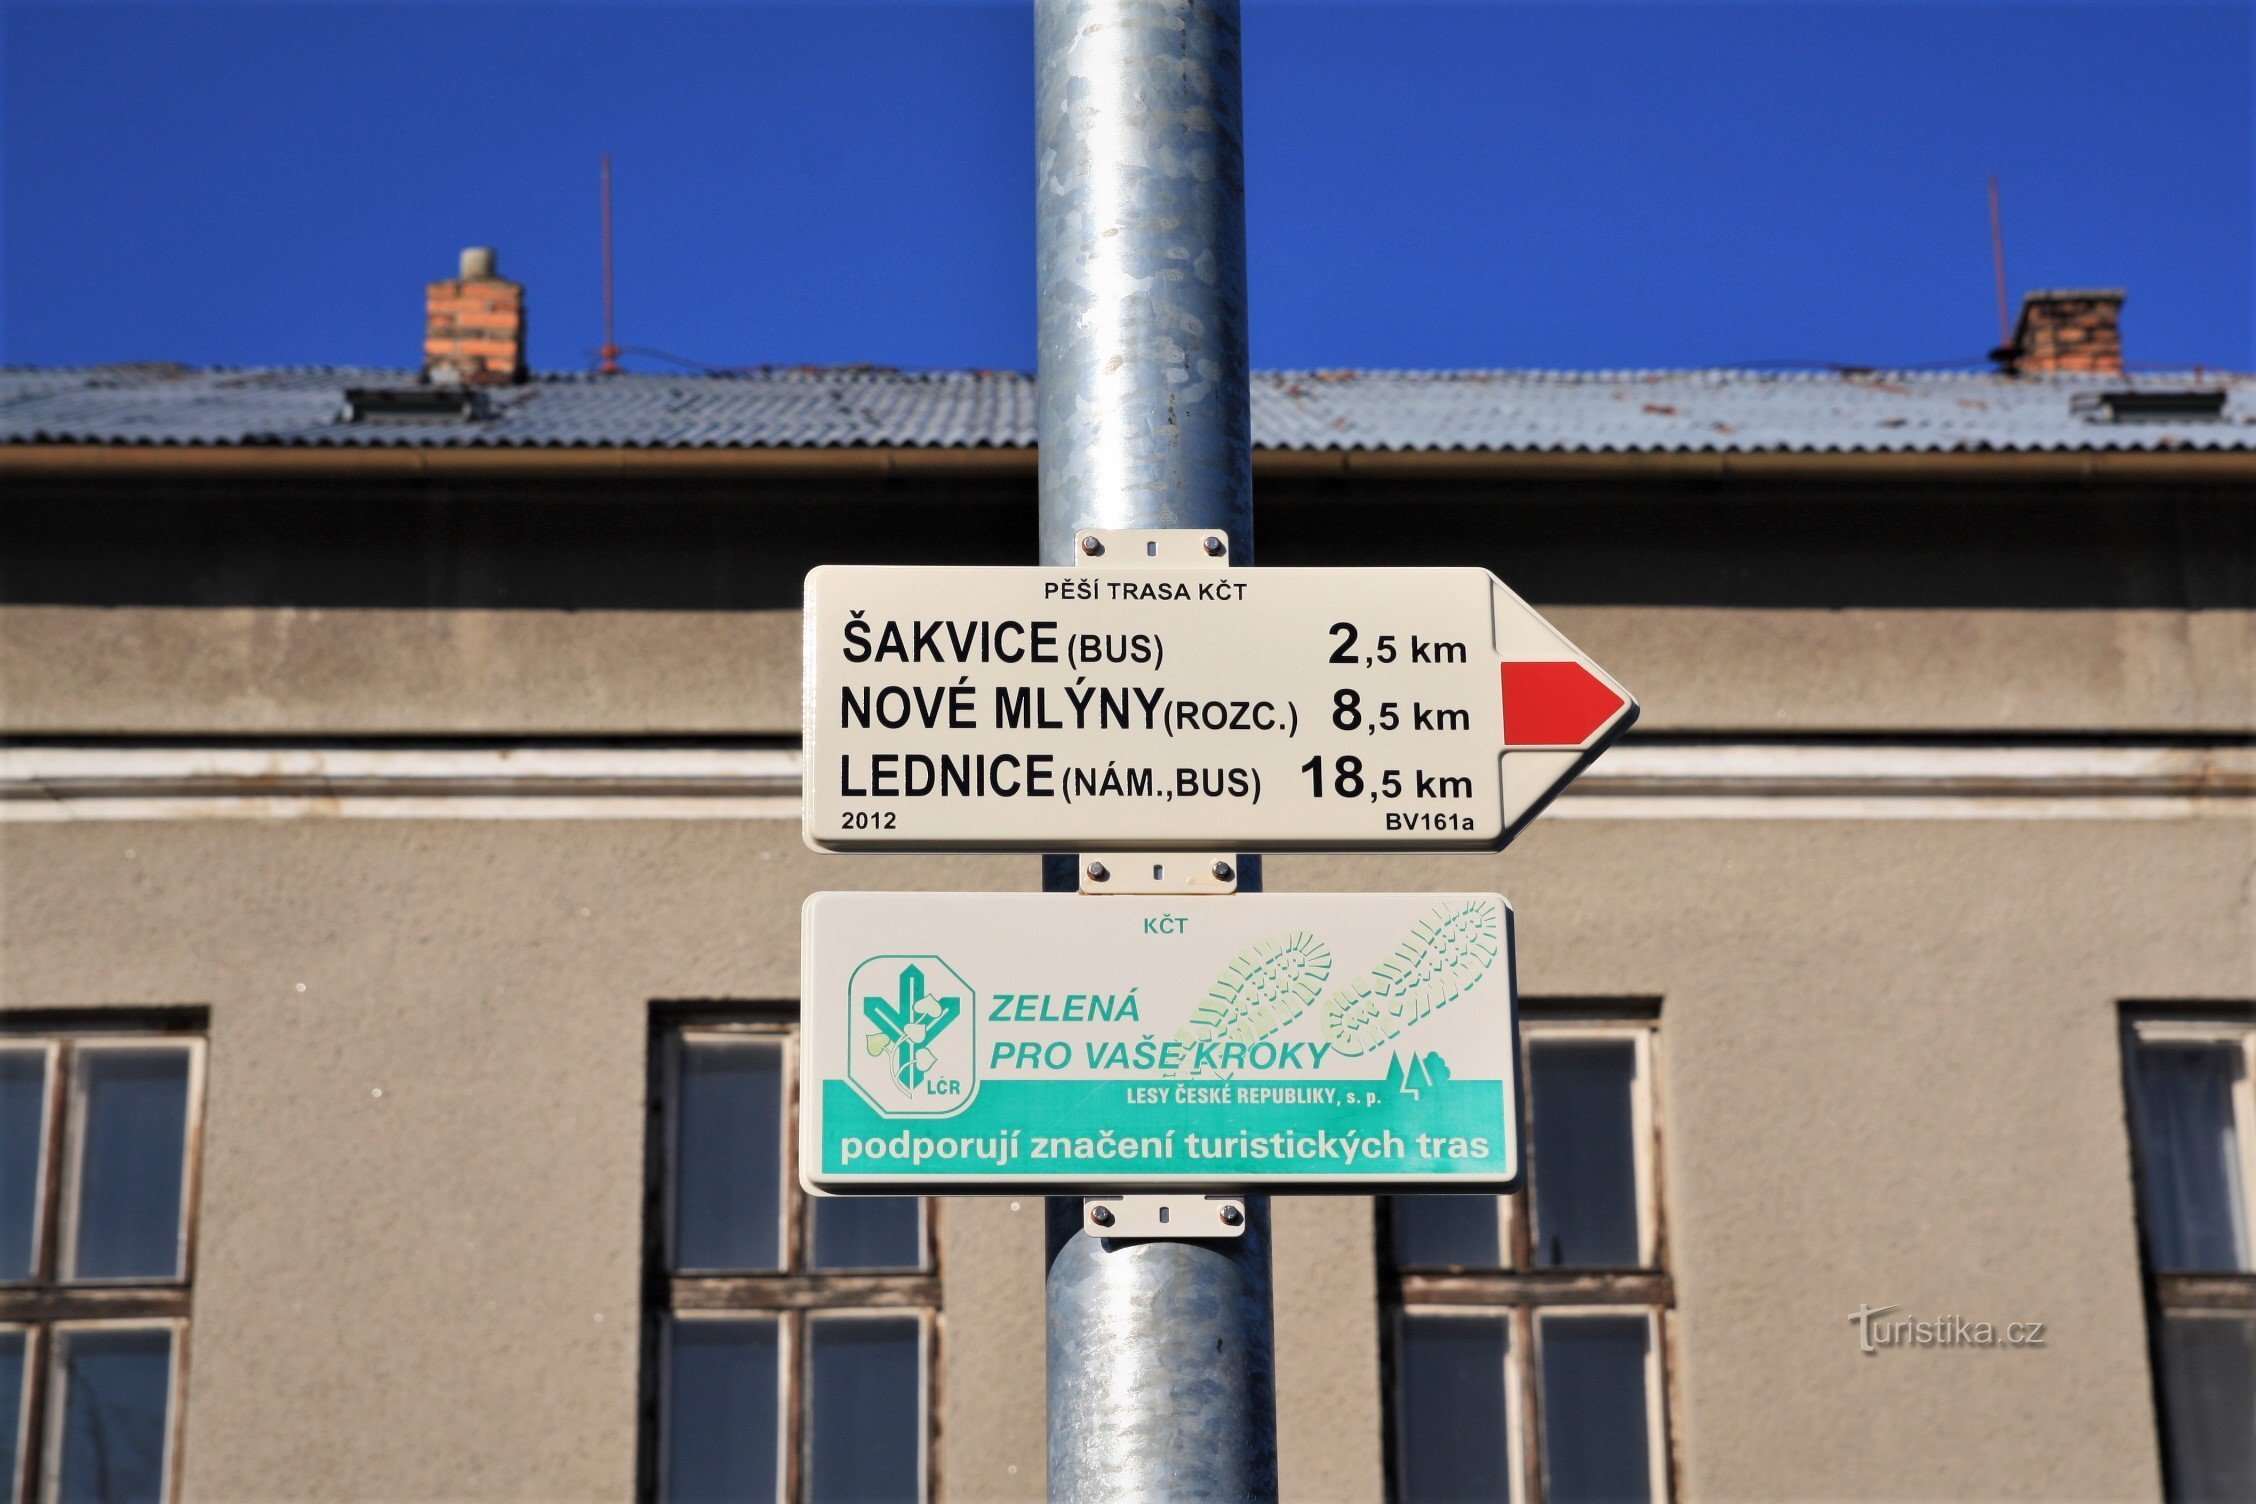 The red-marked tourist route leading to Lednice starts at the railway station and continues up to